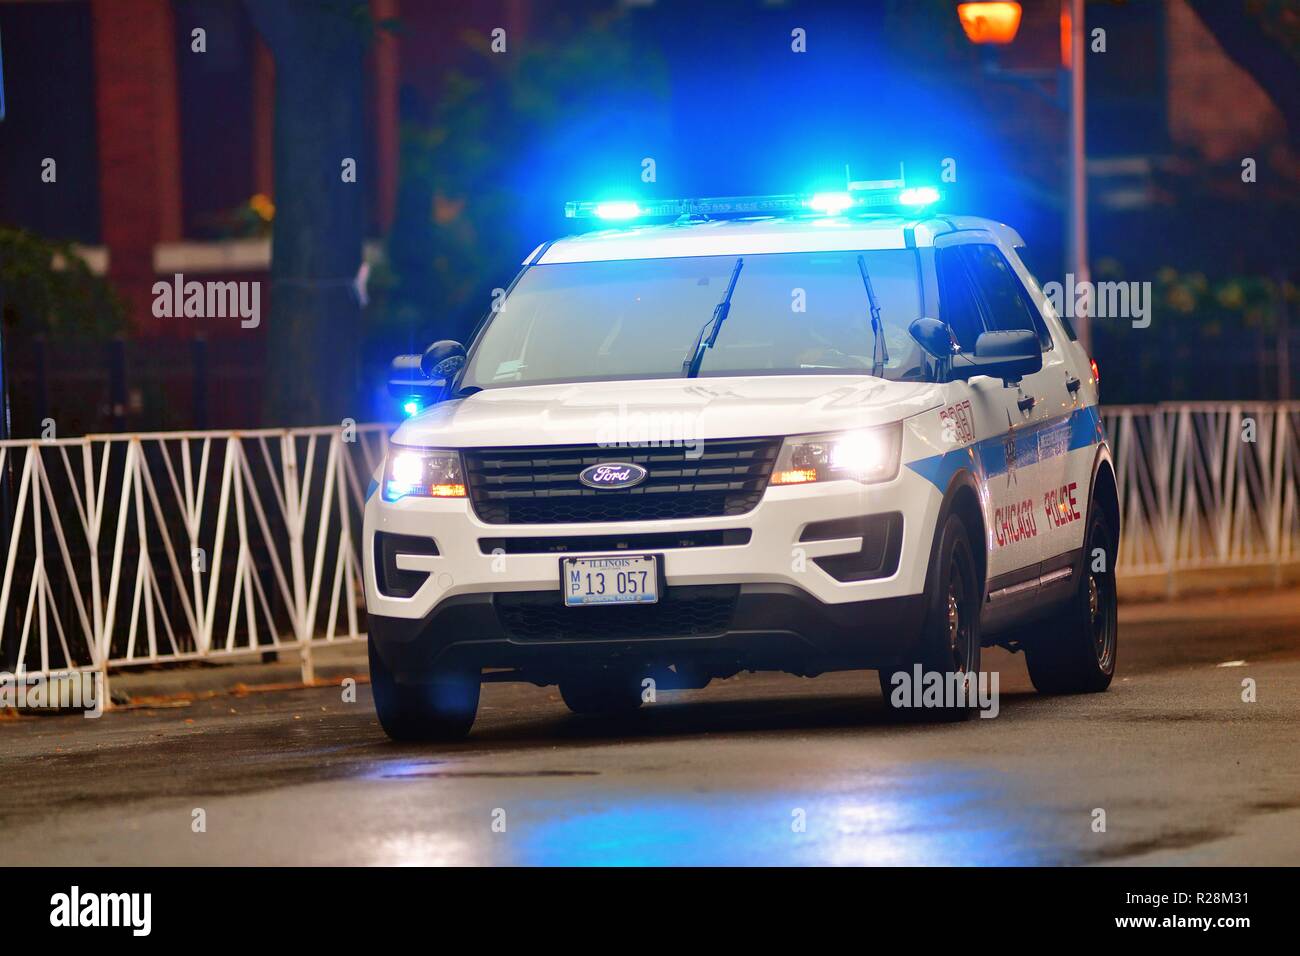 Chicago, Illinois, USA. Police vehilce on a call while on patrol on the streets of Chicago on dreary, rainy morning. Stock Photo